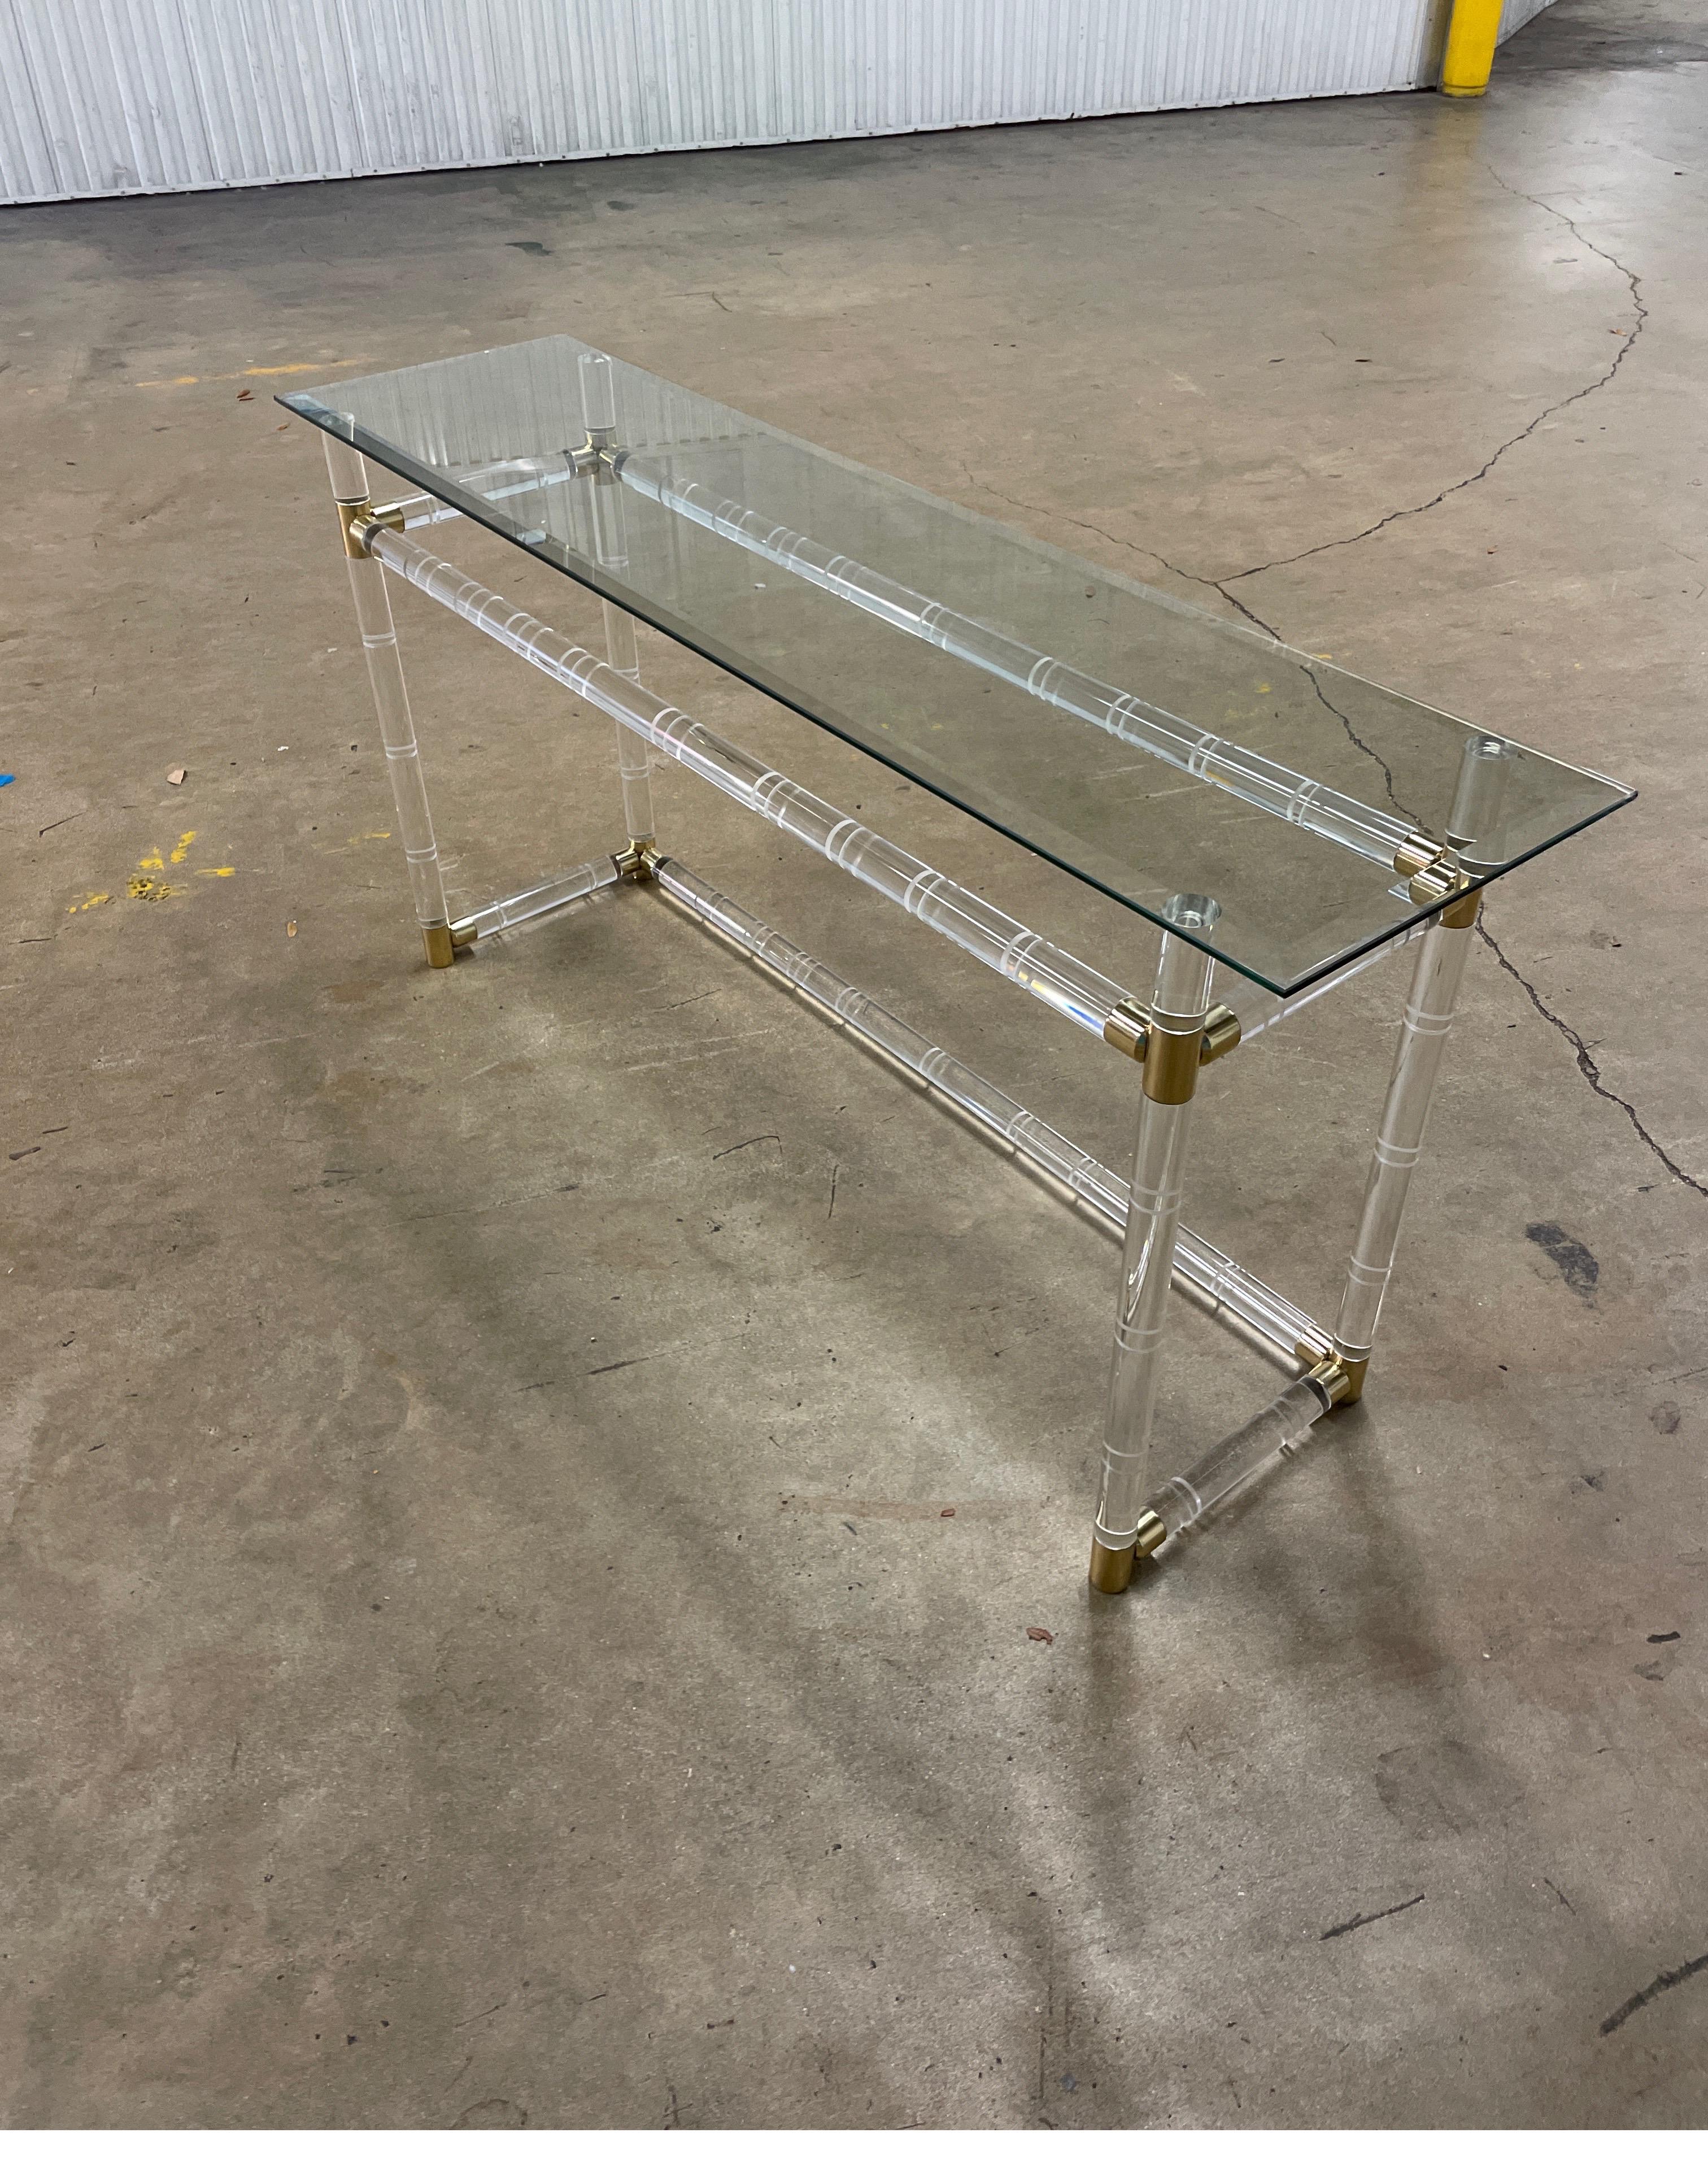 Vintage faux bamboo lucite and brass console table with beveled glass top. This Mid-Century Modern piece is designed to fit a pair of stools or bench underneath. A wonderful Hollywood Regency Mid-Century Modern piece in great condition.